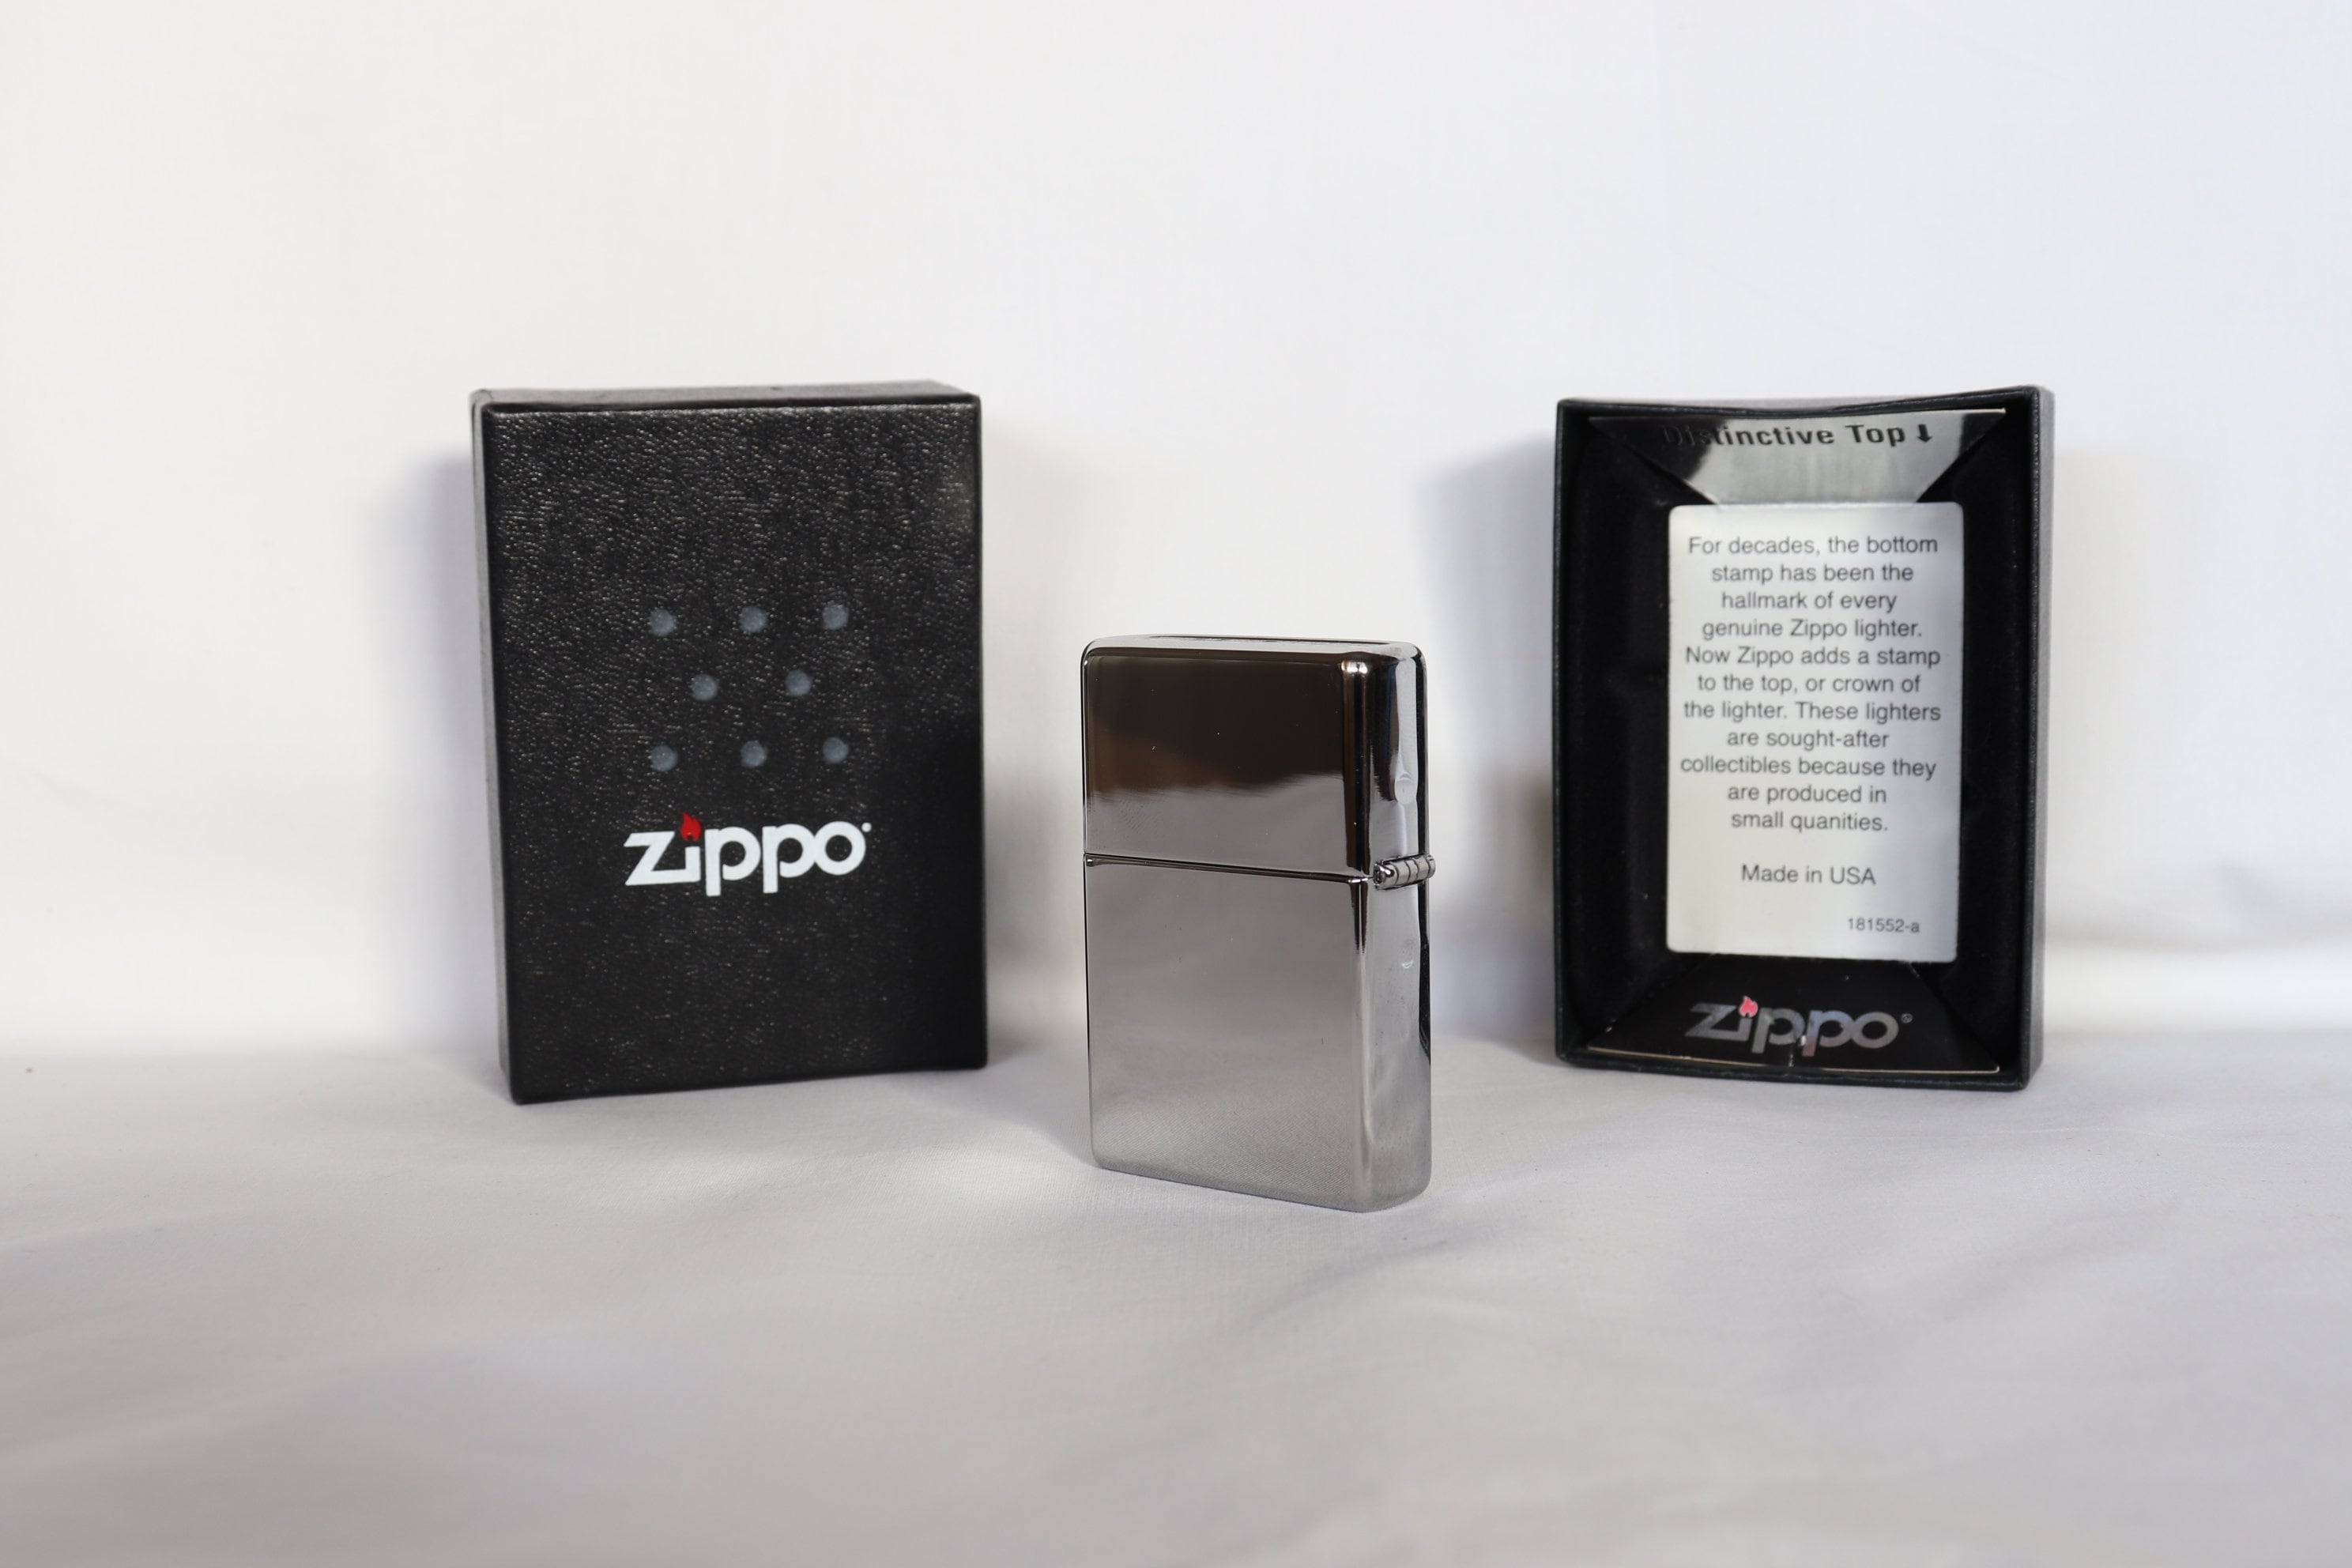 Metal Zippo Classic Antique Brass Windproof Pocket Lighter at Rs